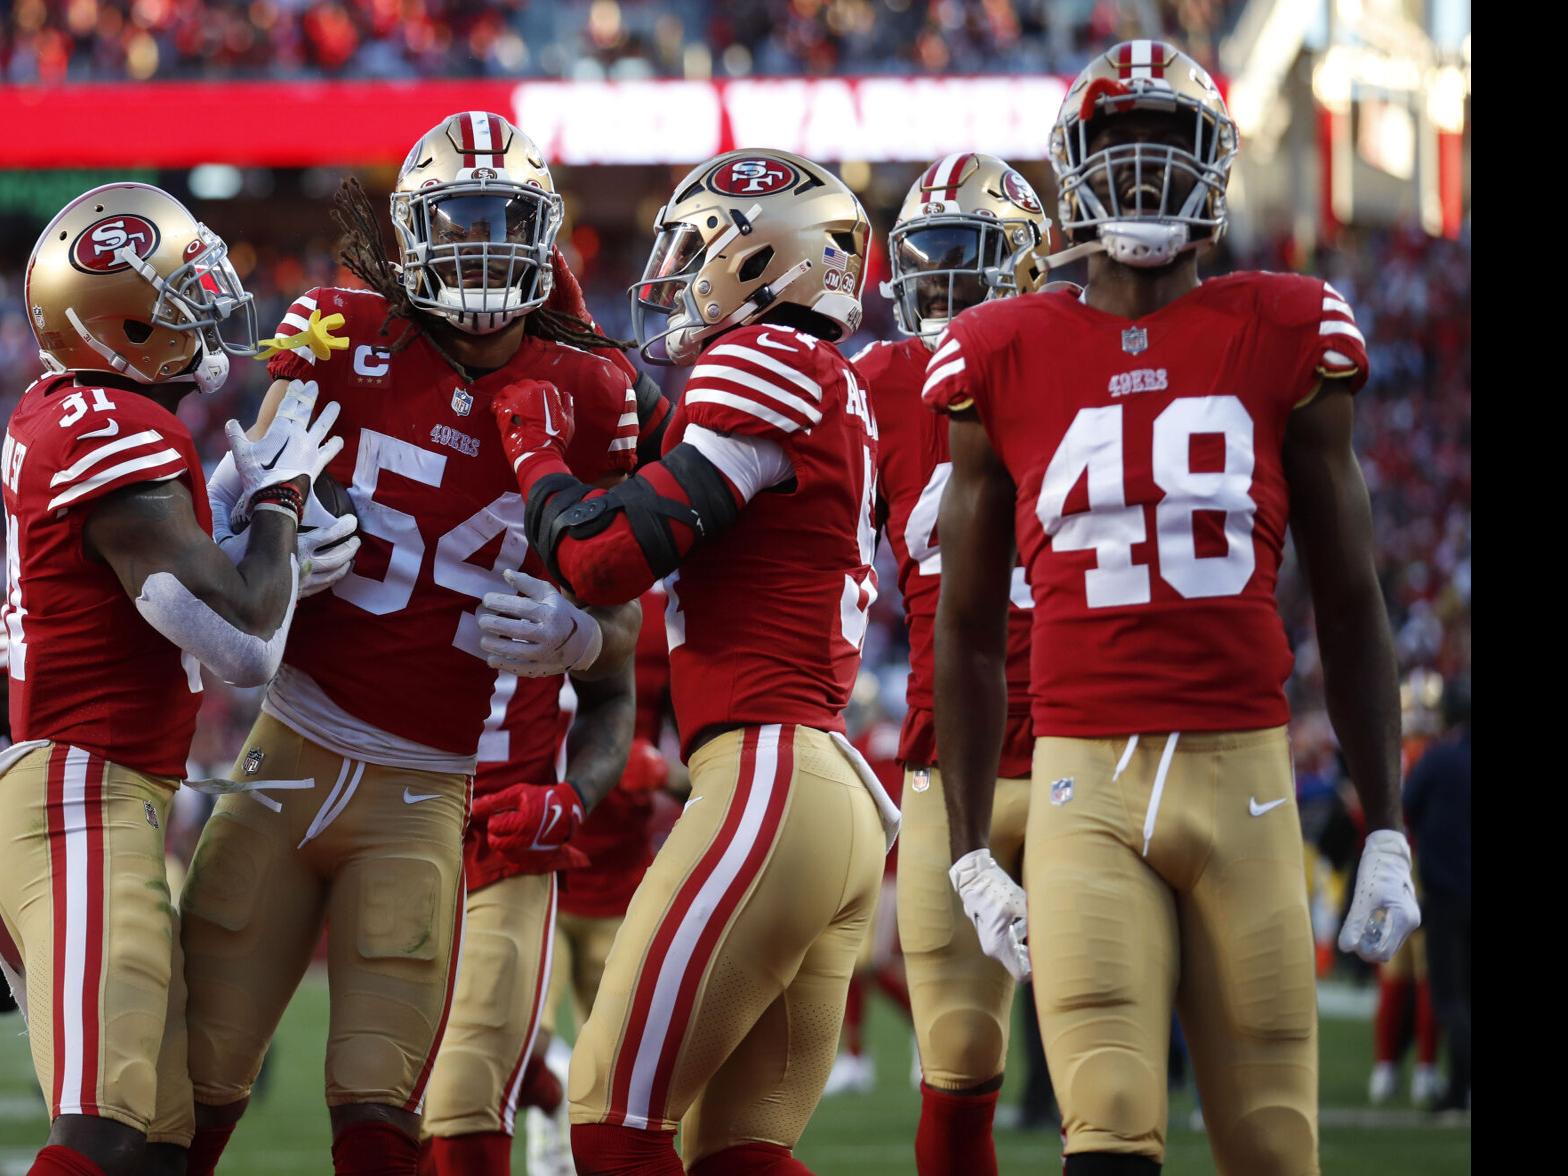 49ers NFL Betting Odds  Super Bowl, Playoffs & More - Sports